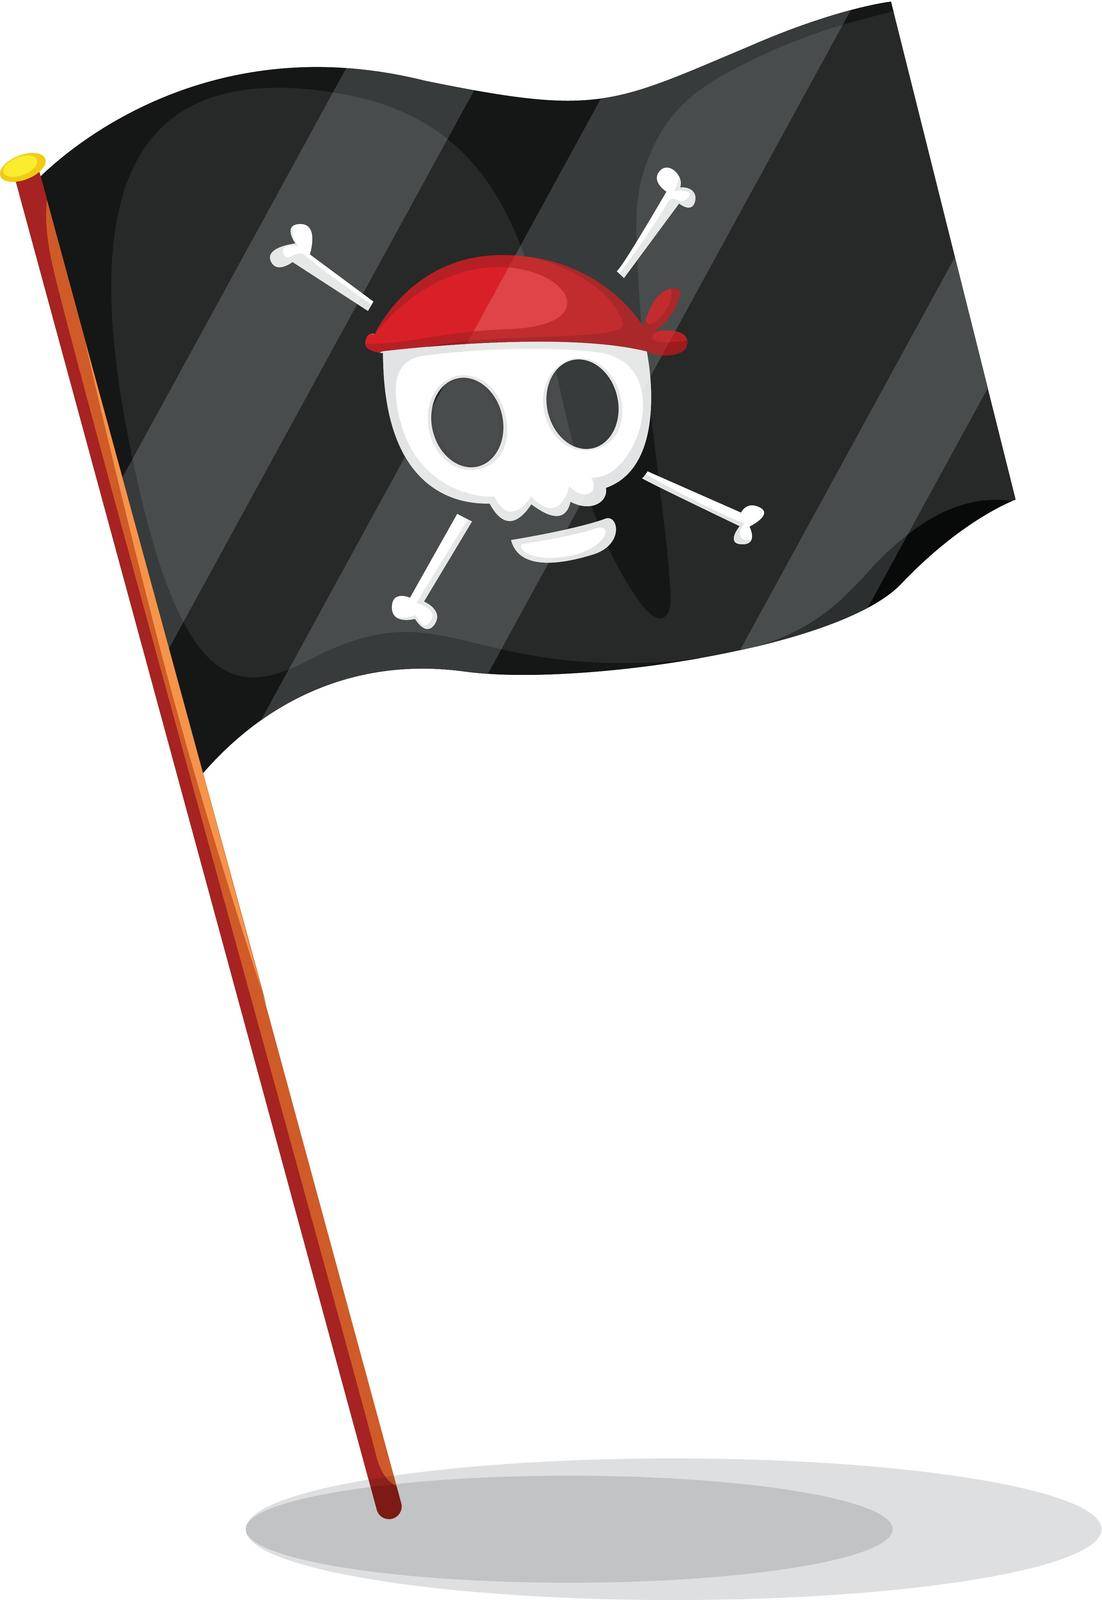 Illustration of a pirate flag